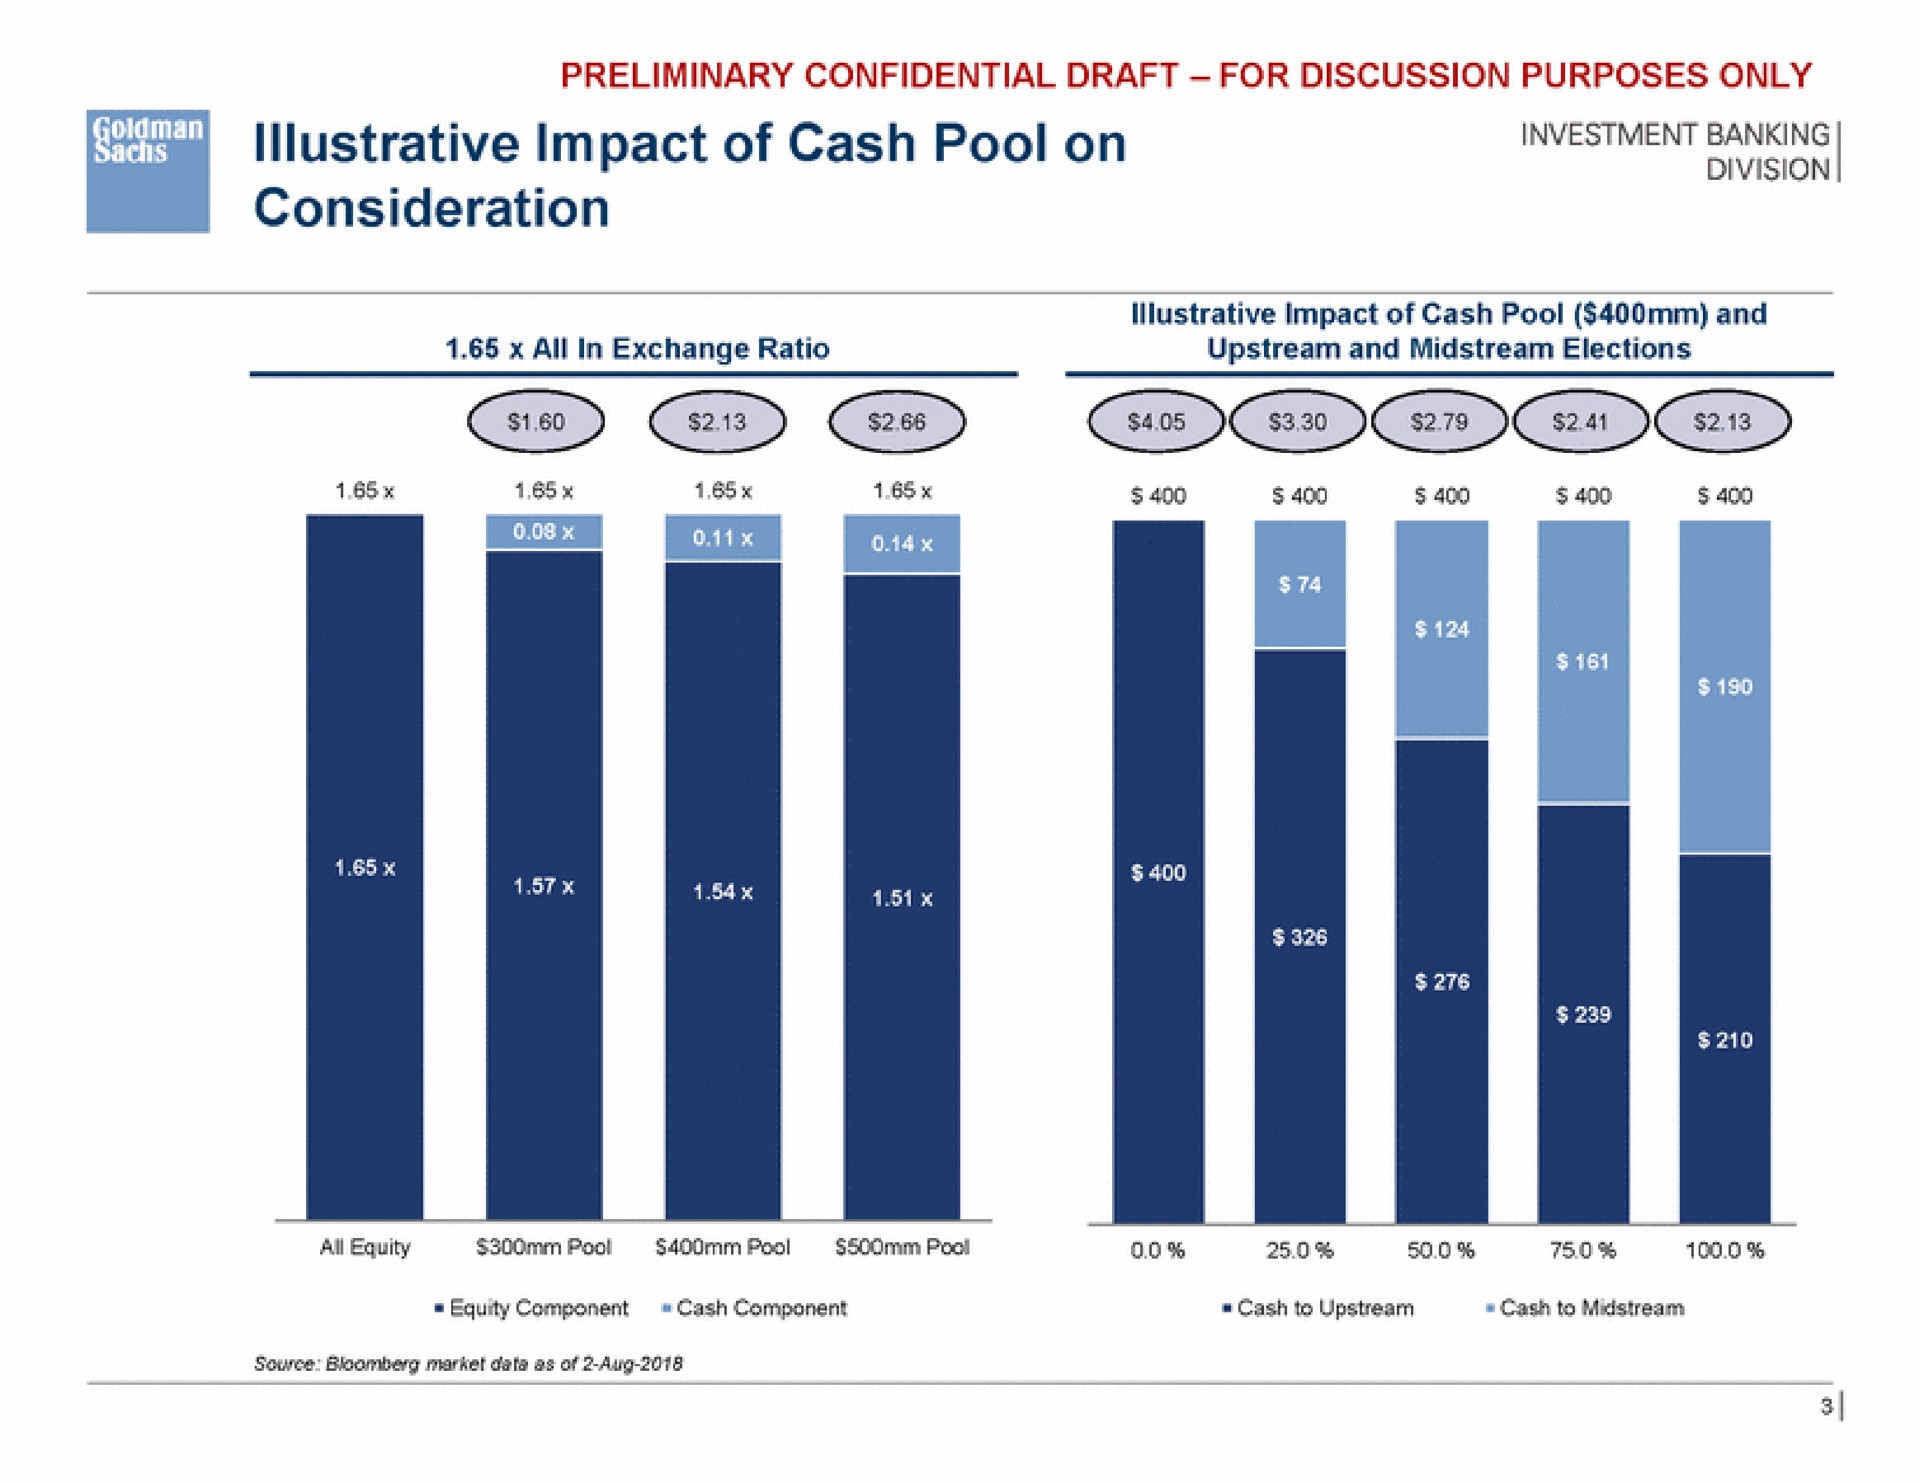 impact of cash pool on consideration investment banking is | Goldman Sachs